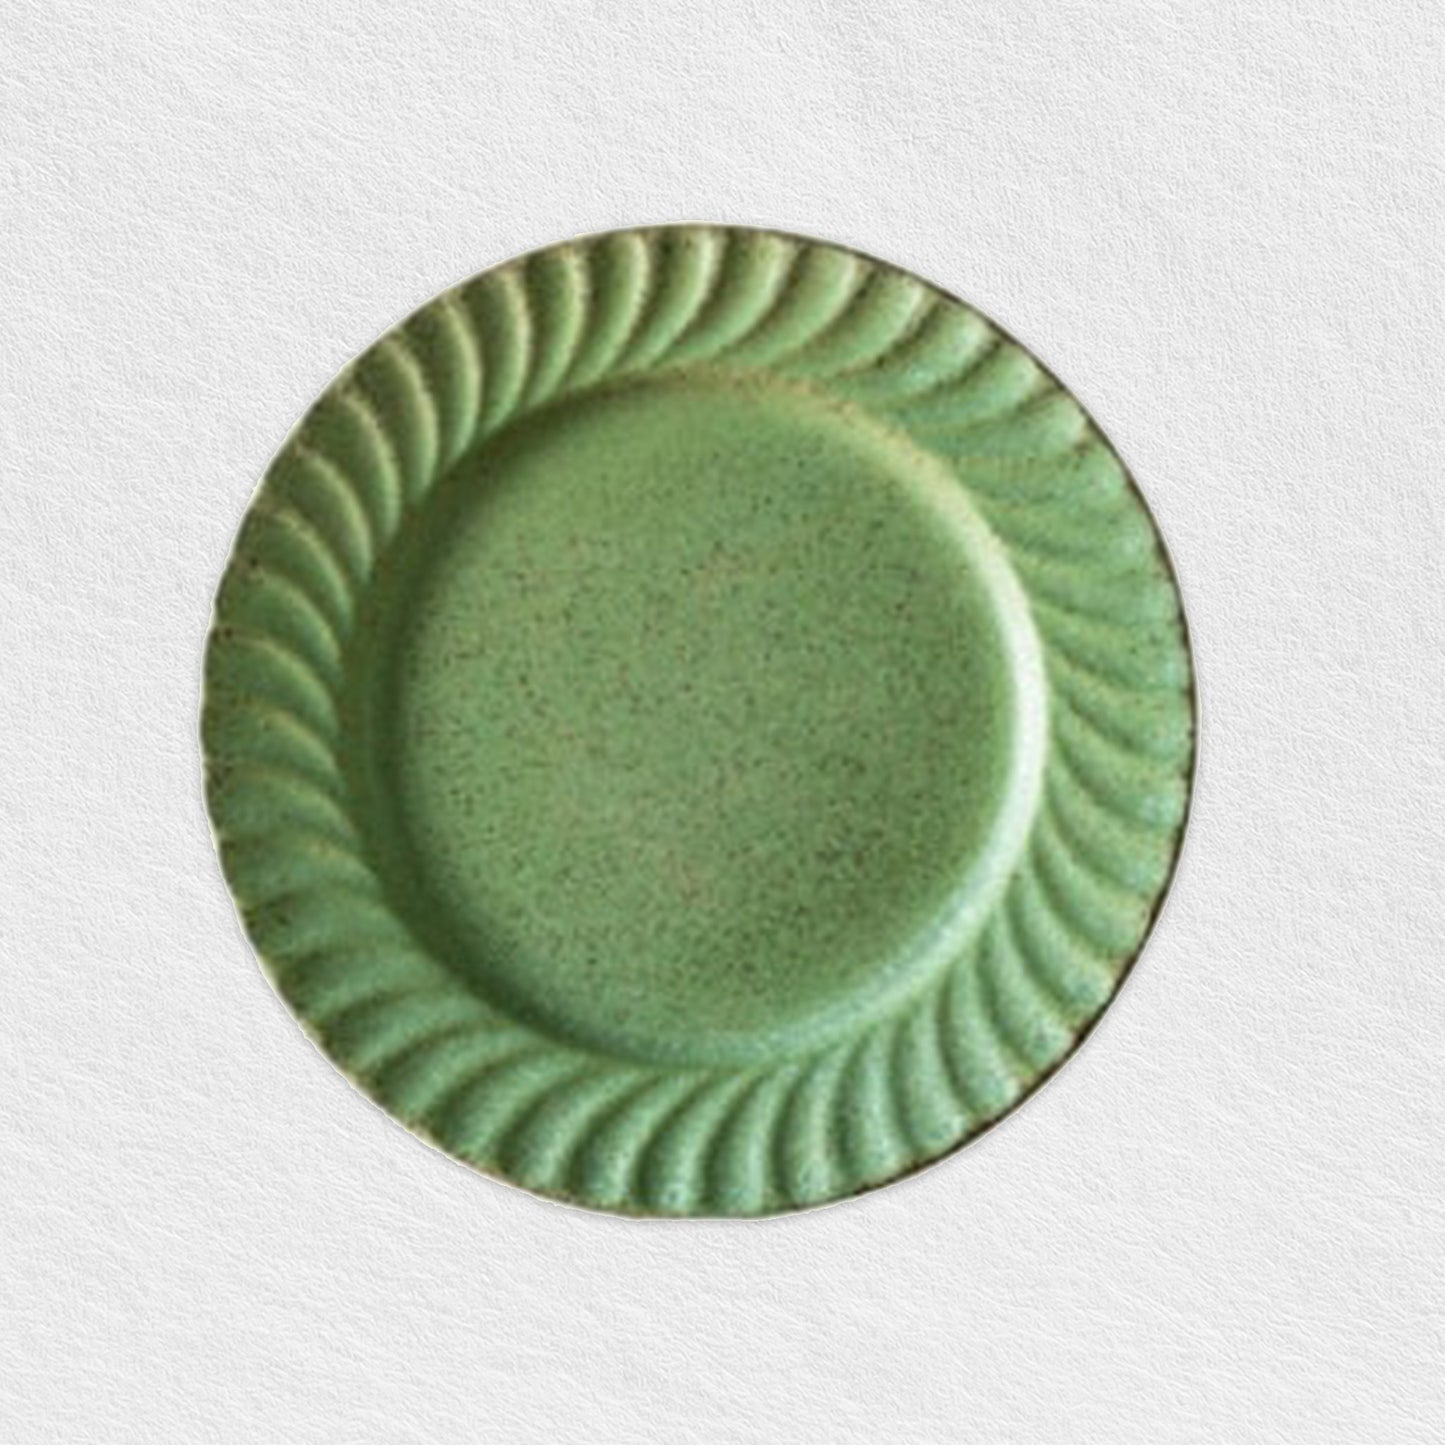 Green Leaves Round Plates